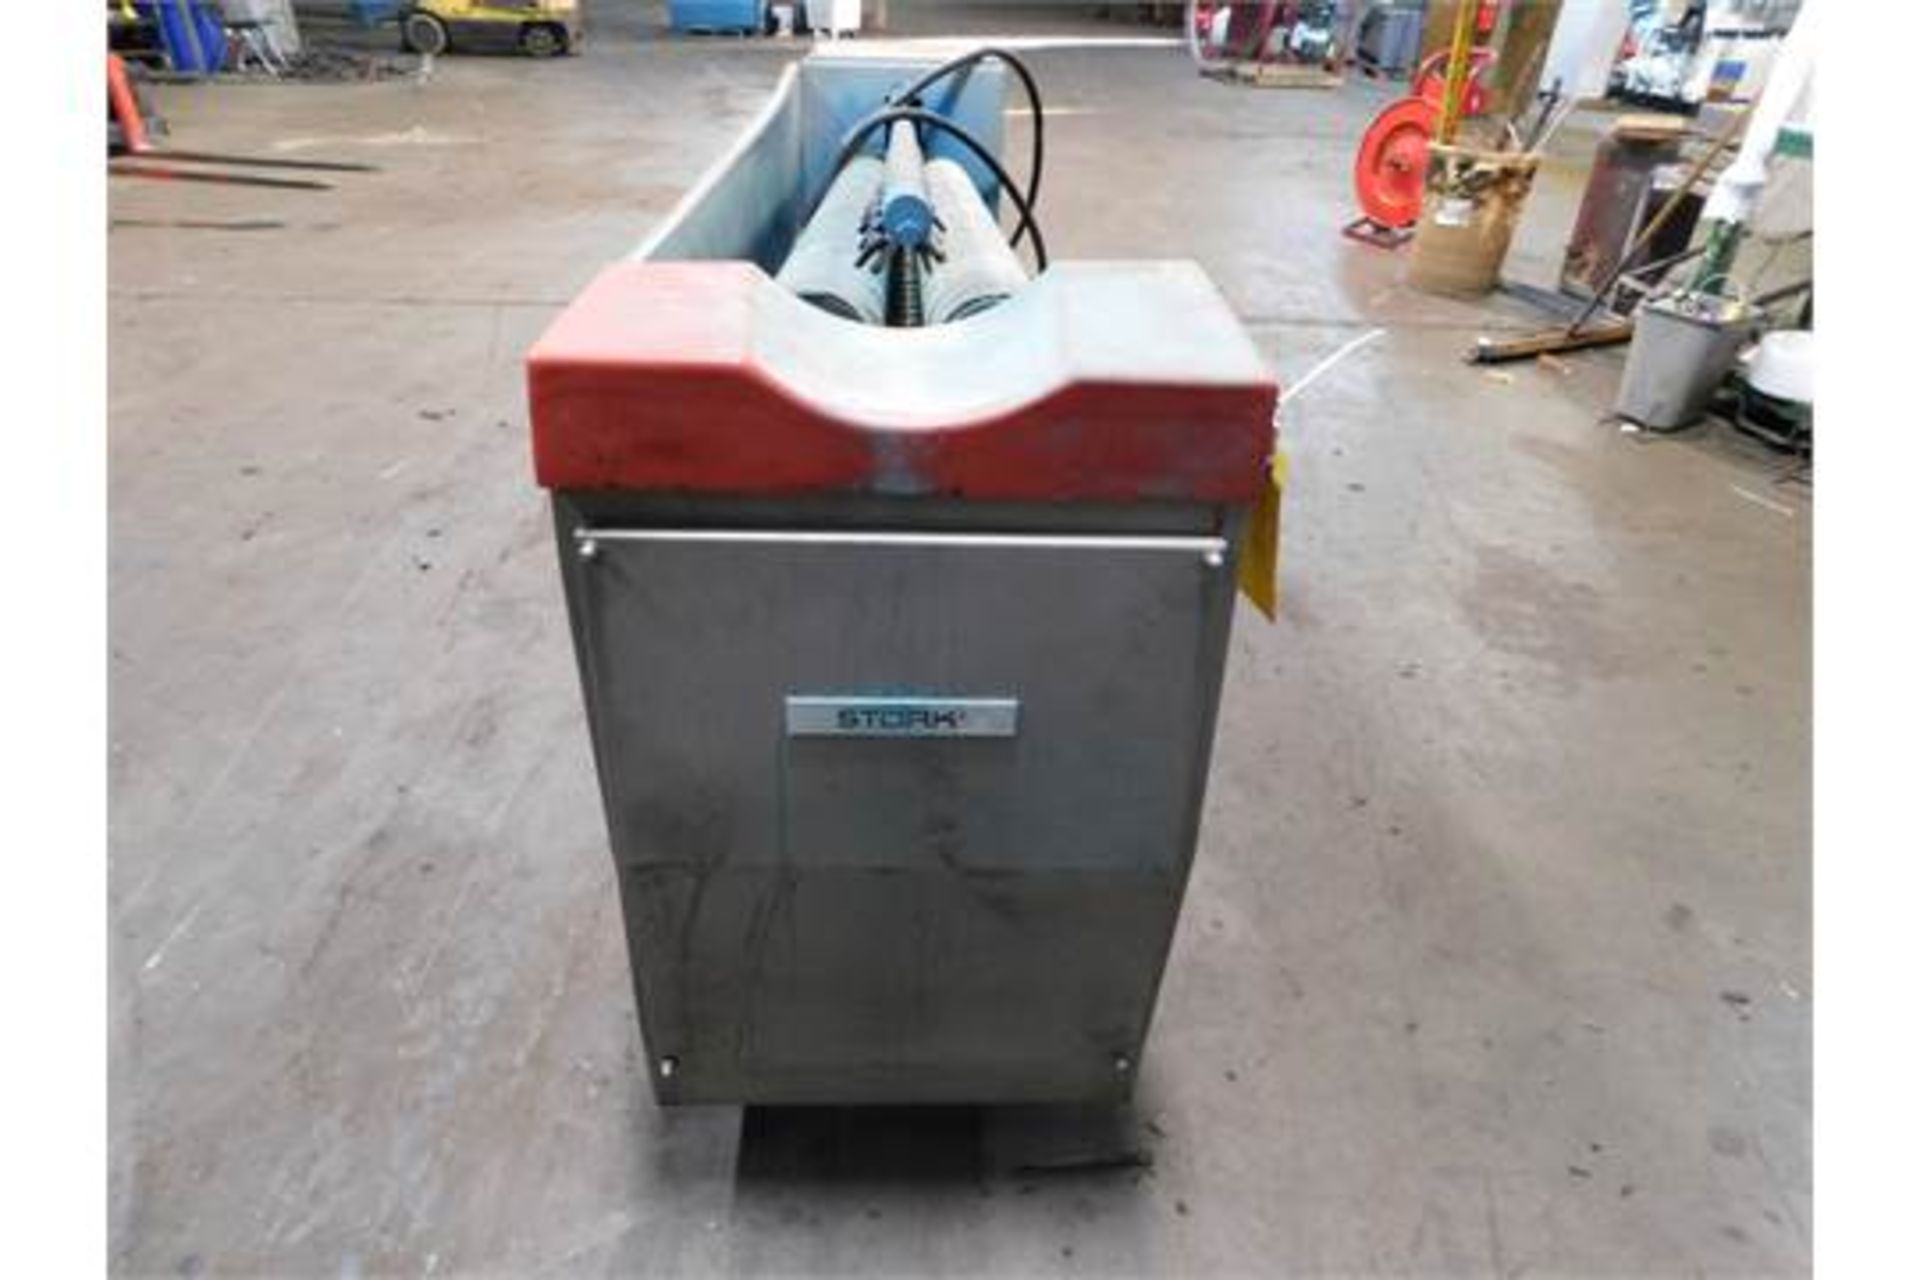 Stork screen washing, Working Width 67 3/4", Screen washer for Rotary screens, Good Condition, - Image 3 of 4